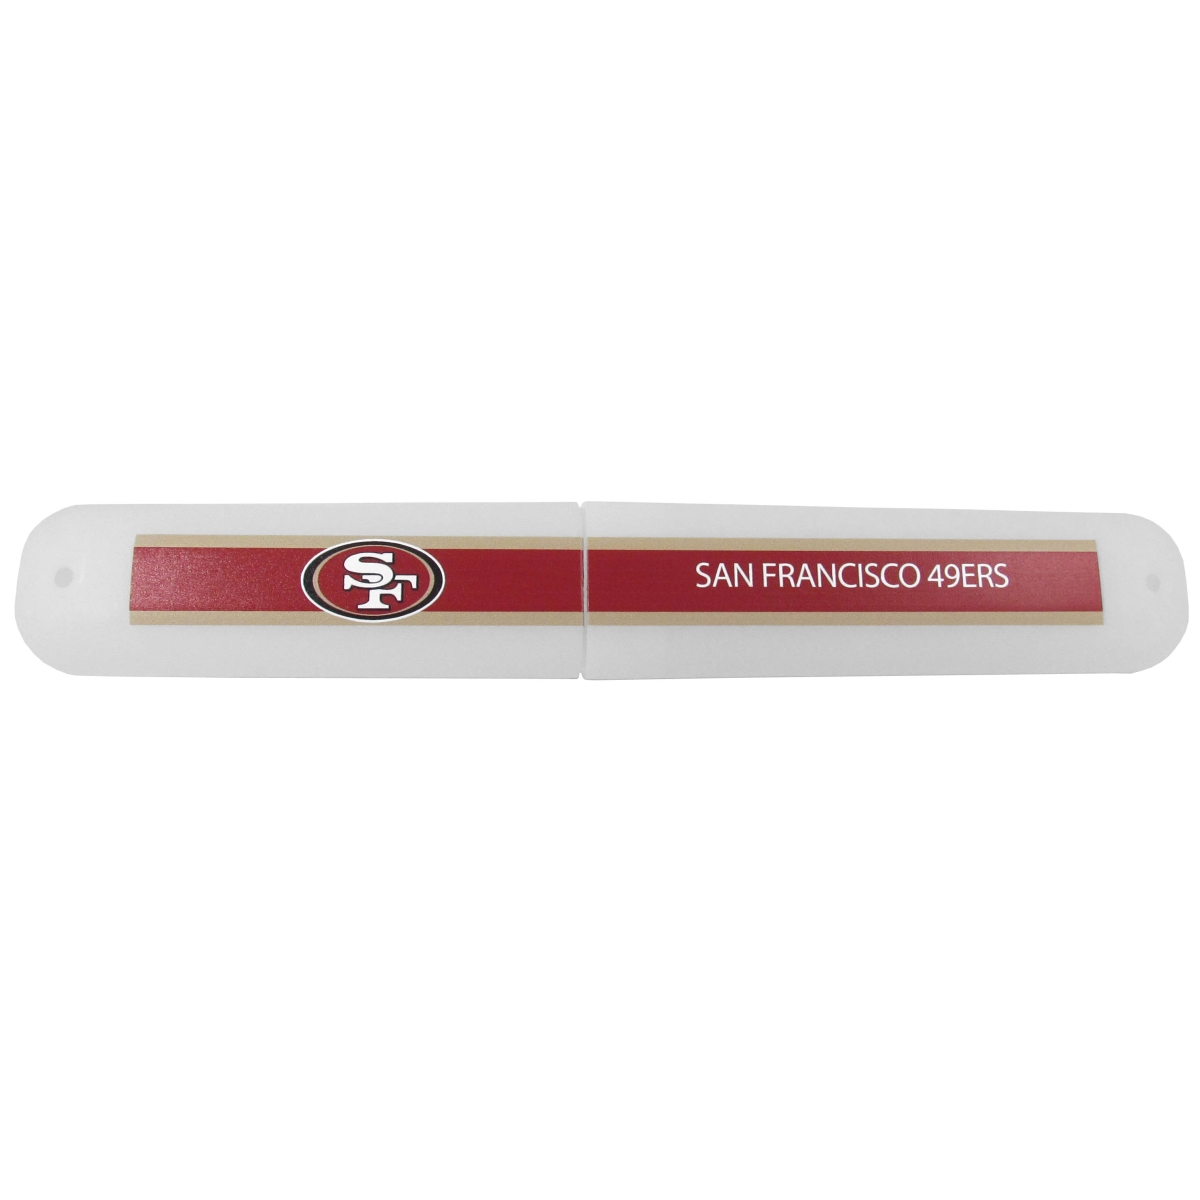 Picture of Siskiyou FTBC075 Unisex NFL San Francisco 49ers Travel Toothbrush Case - One Size